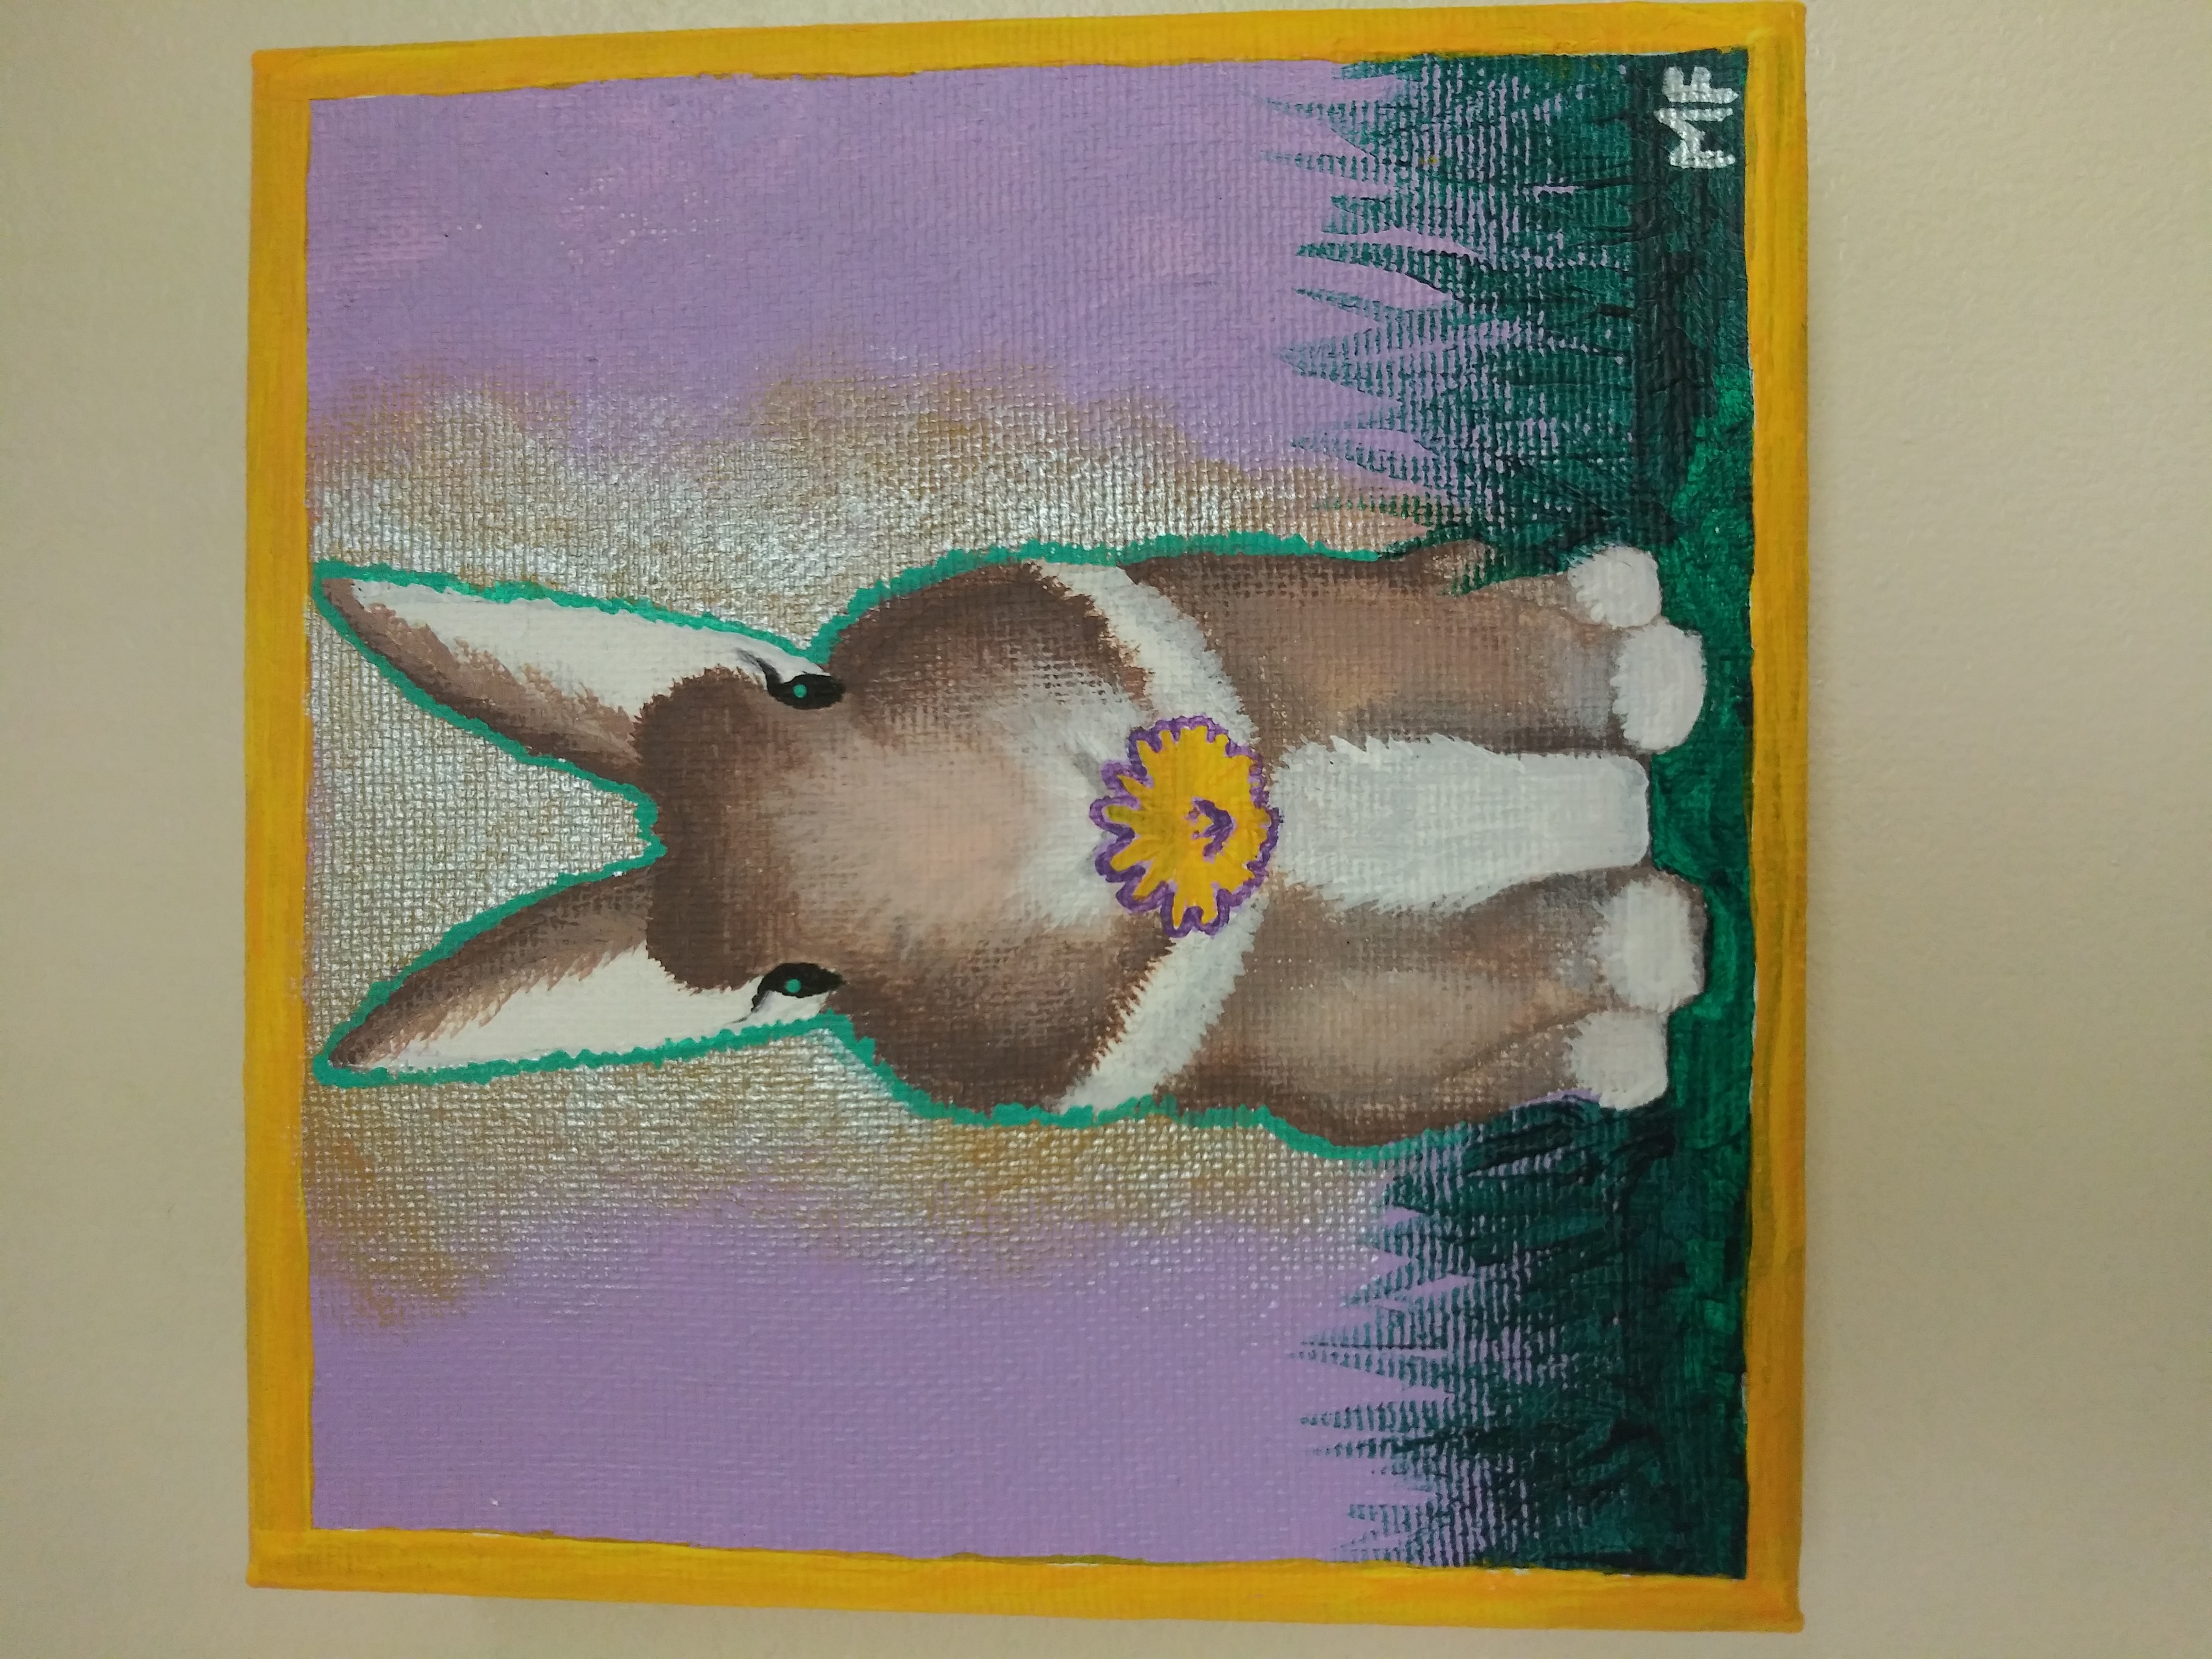 It's a bunny eating a dandilion.